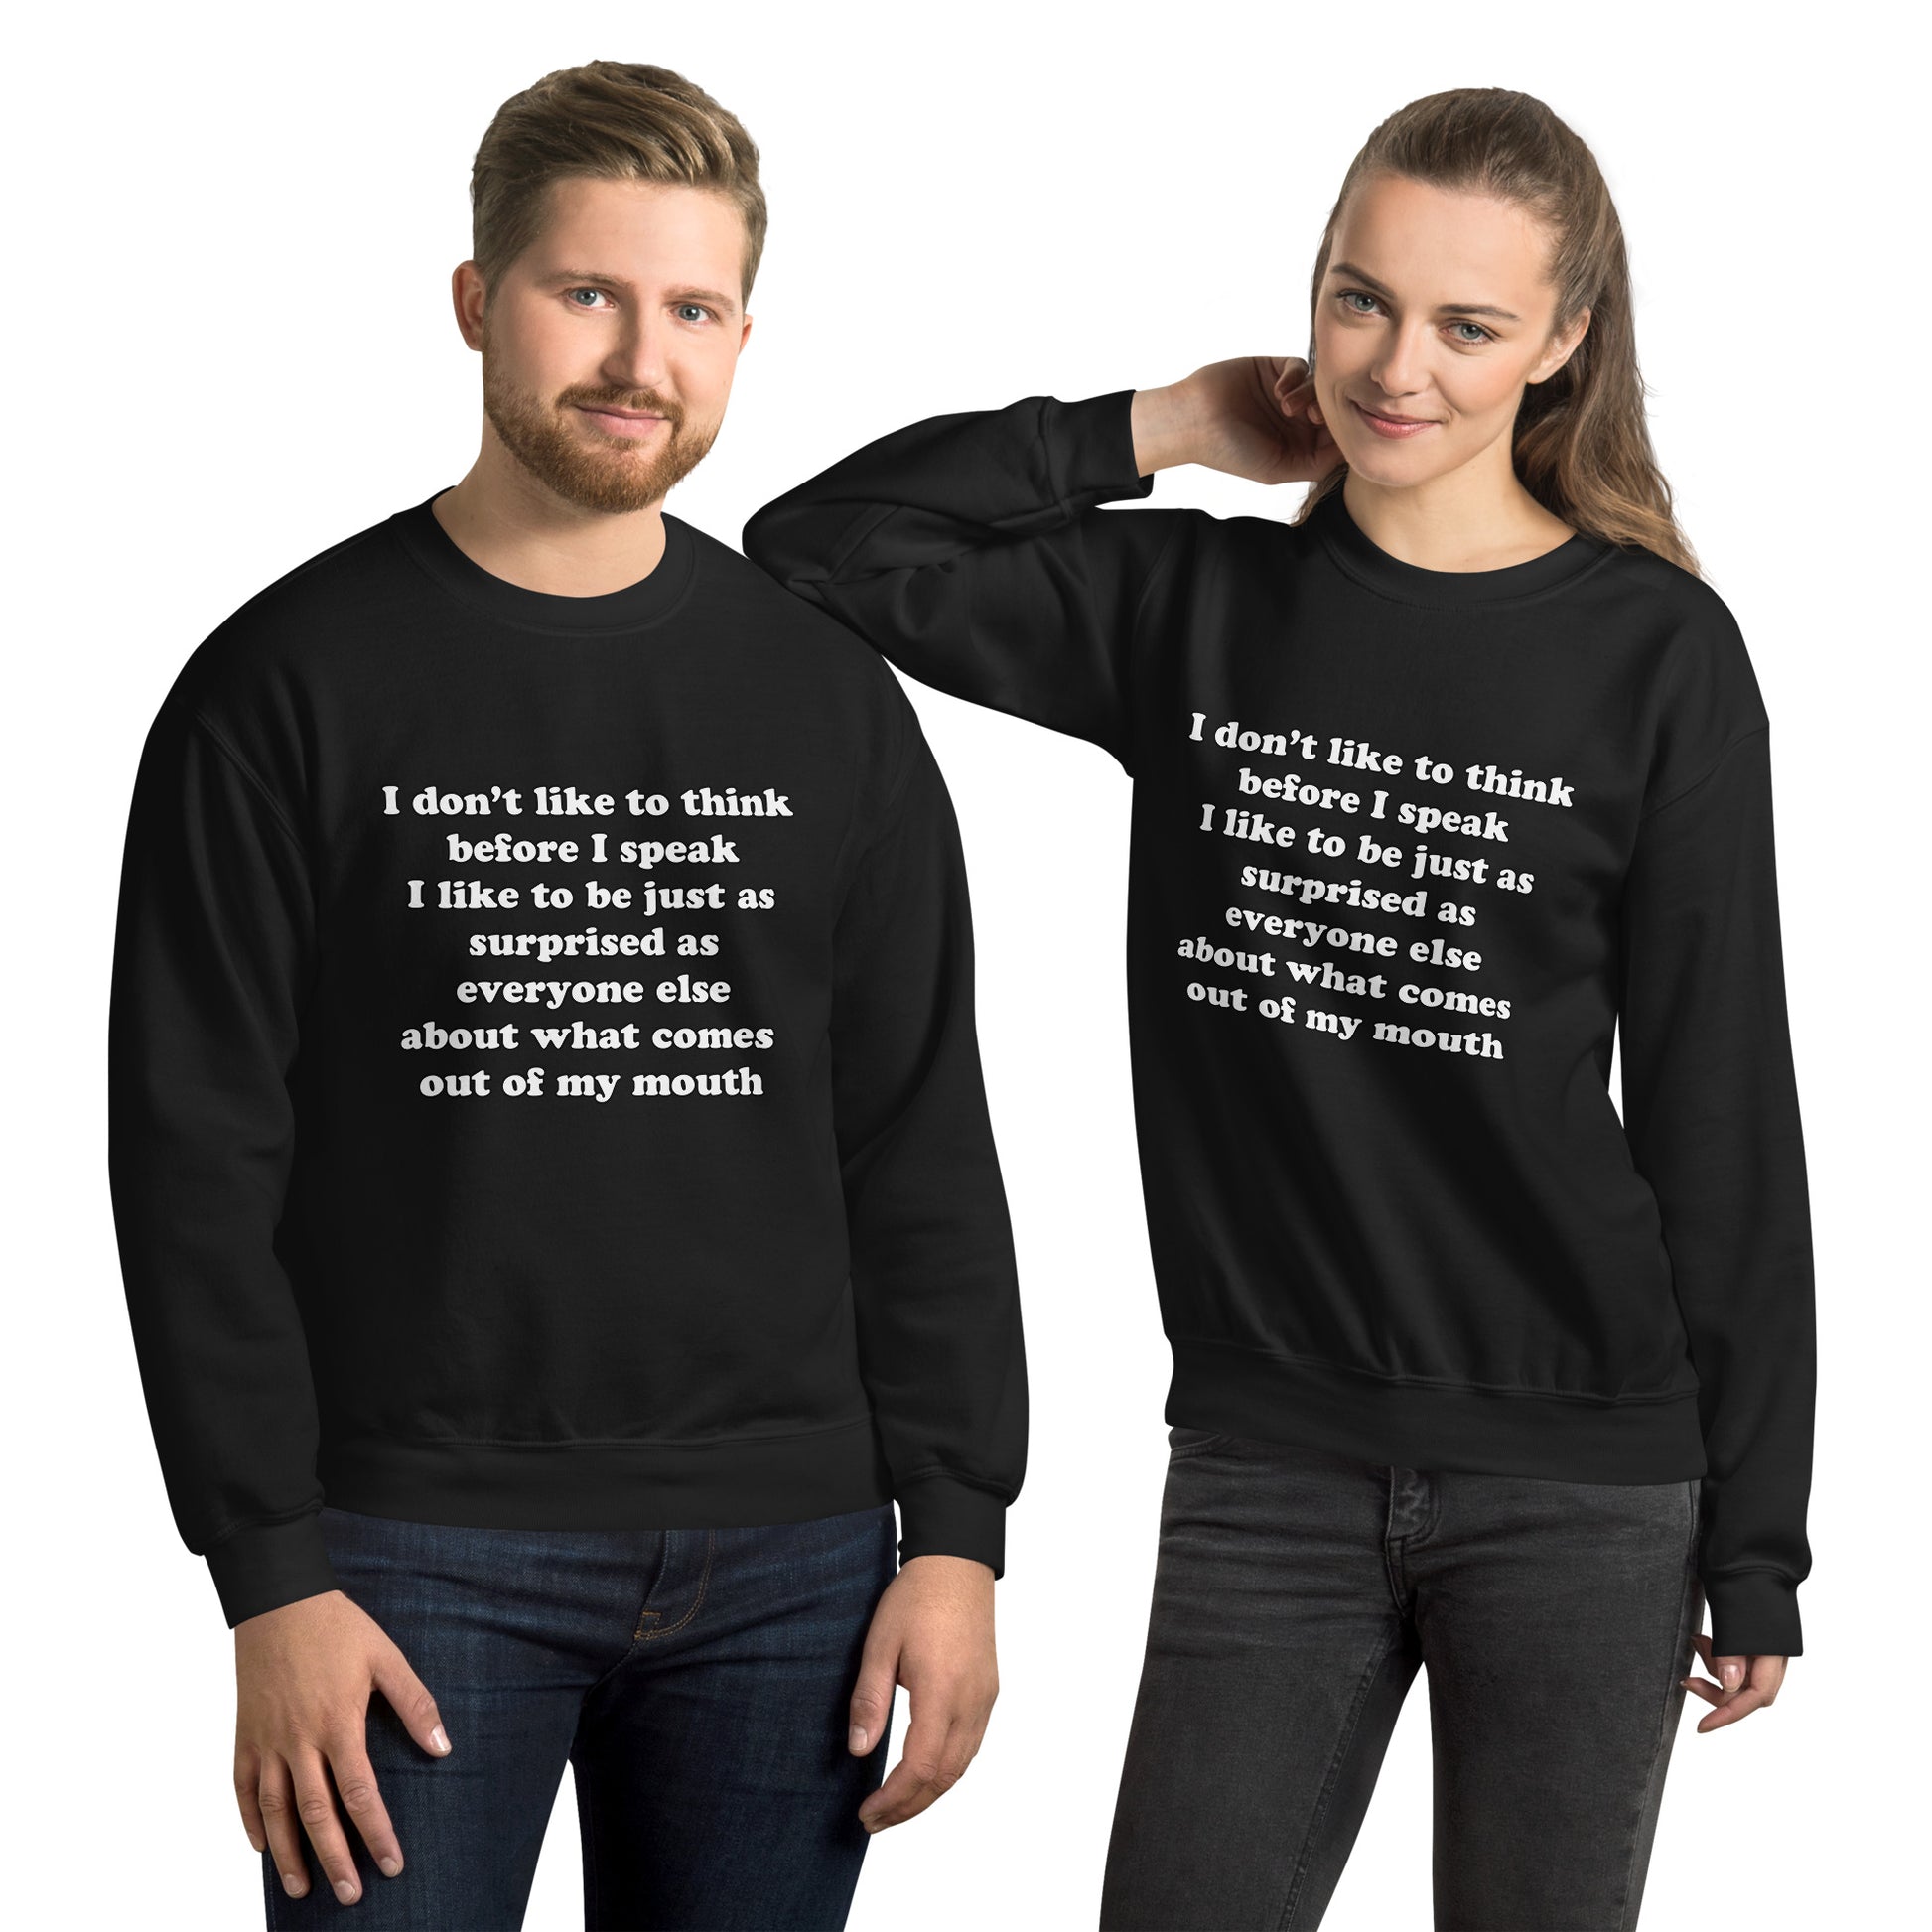 Man and woman with black sweatshirt with text “I don't think before I speak Just as serprised as everyone about what comes out of my mouth"